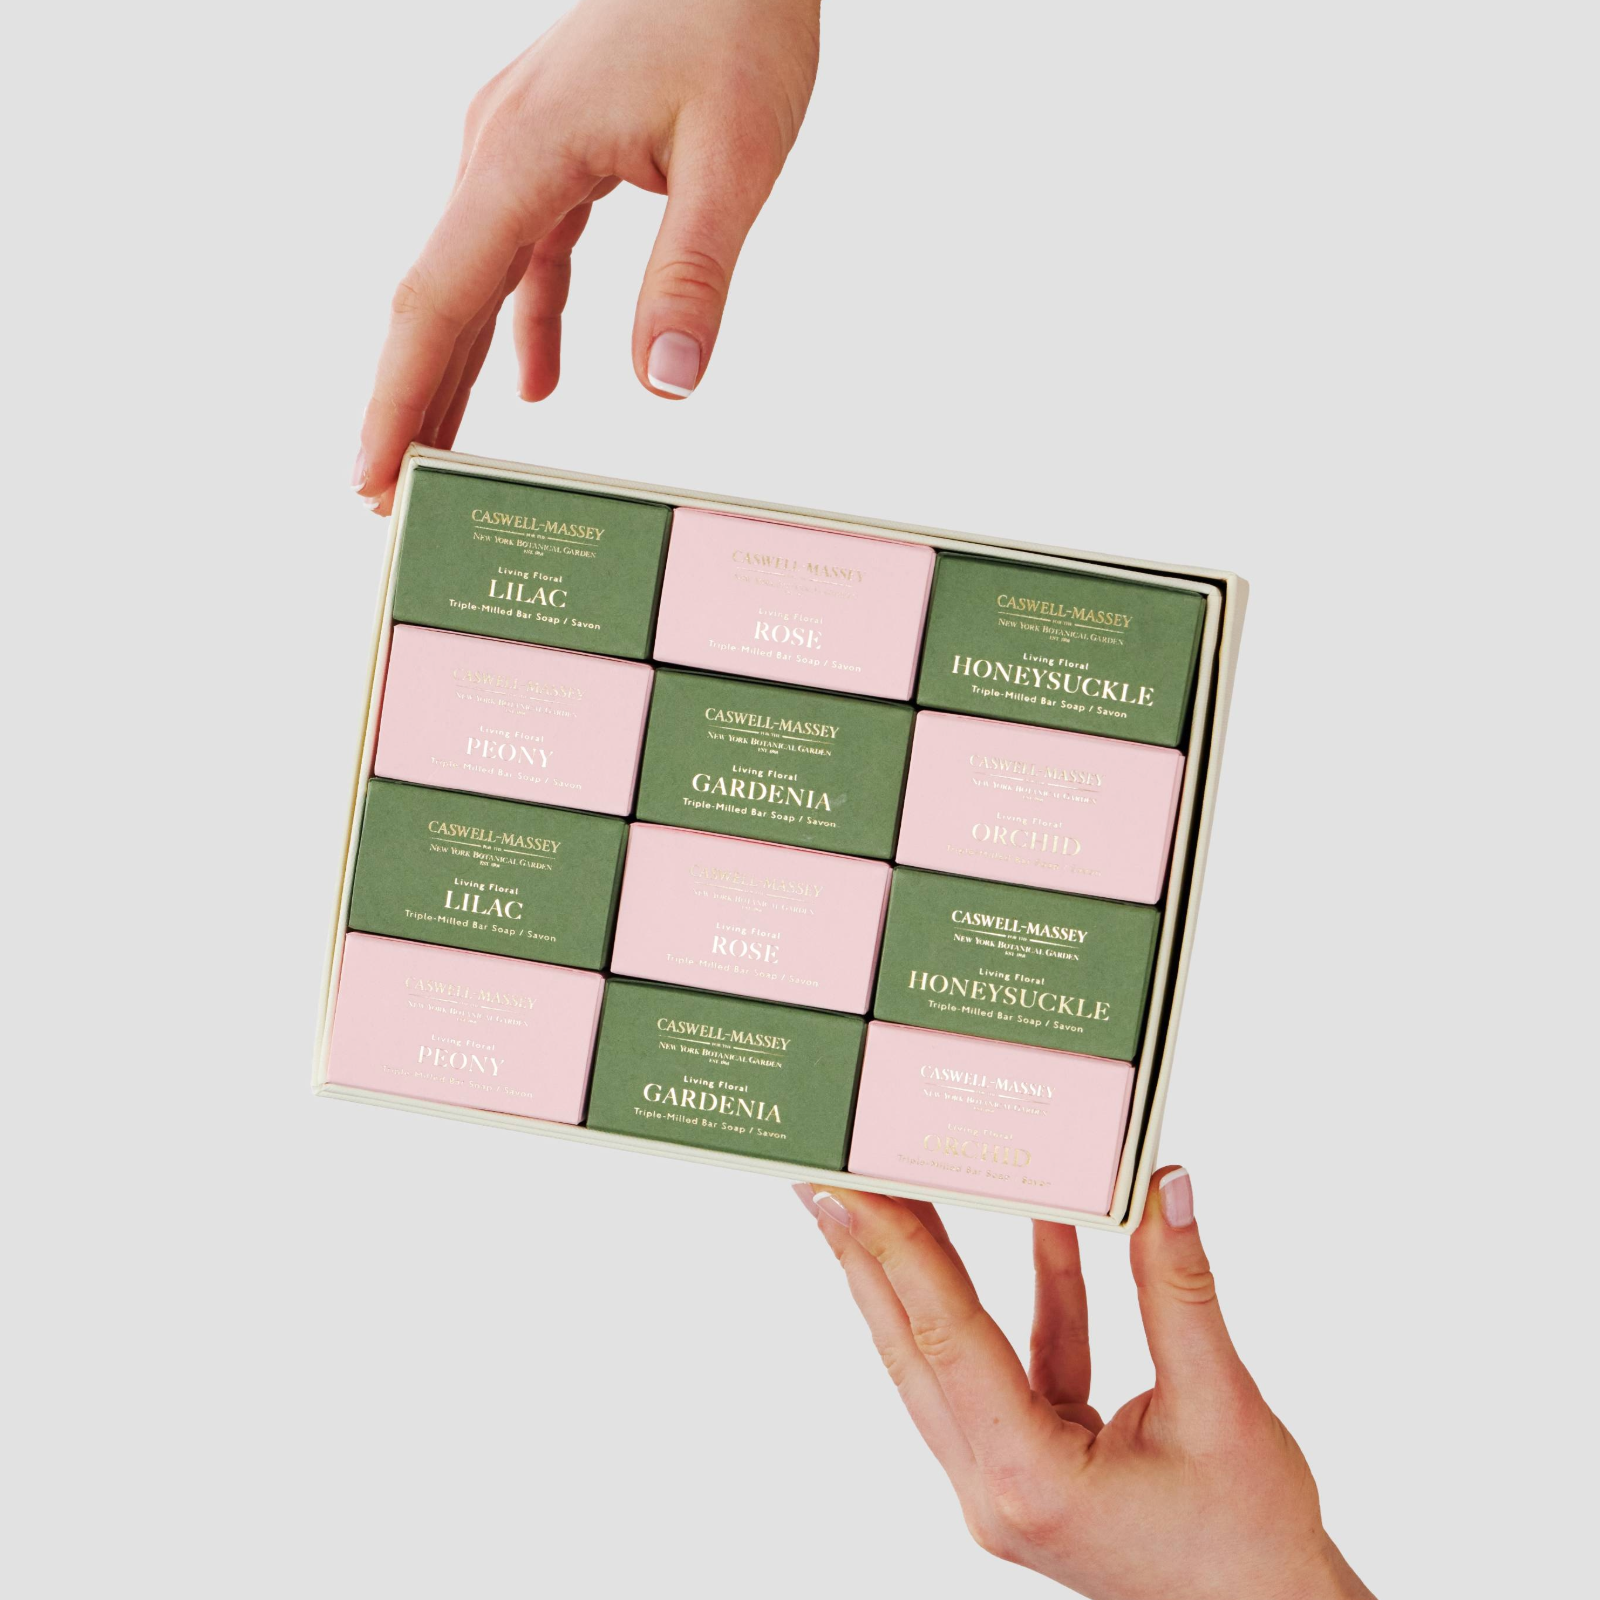 Caswell-Massey Designer Floral Year of Soap Gift Set: woman's hands holding the box open revealing the alternative pink and green color of the boxed bars of soap filling the gift box